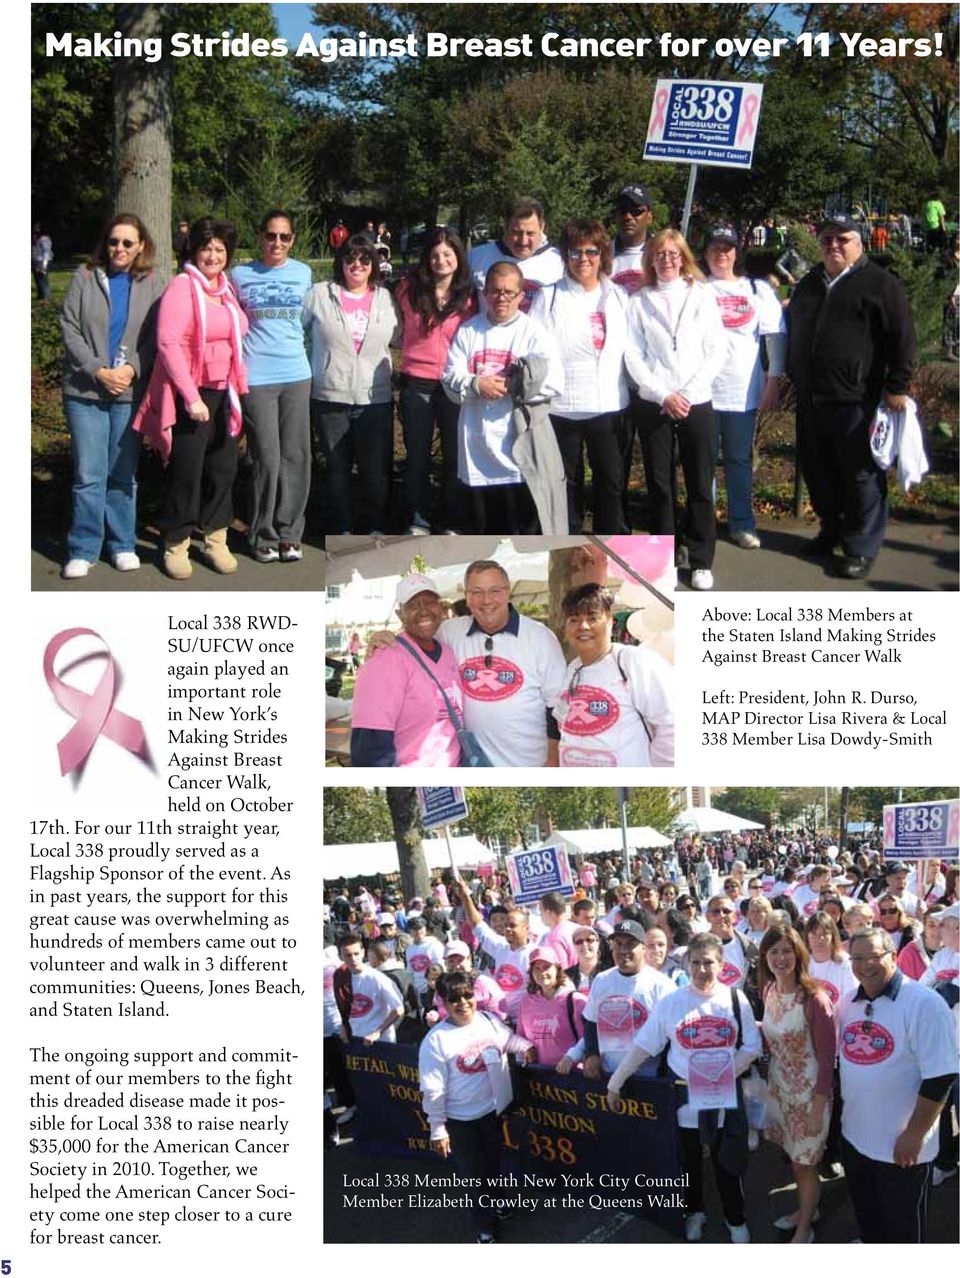 As in past years, the support for this great cause was overwhelming as hundreds of members came out to volunteer and walk in 3 different communities: Queens, Jones Beach, and Staten Island.